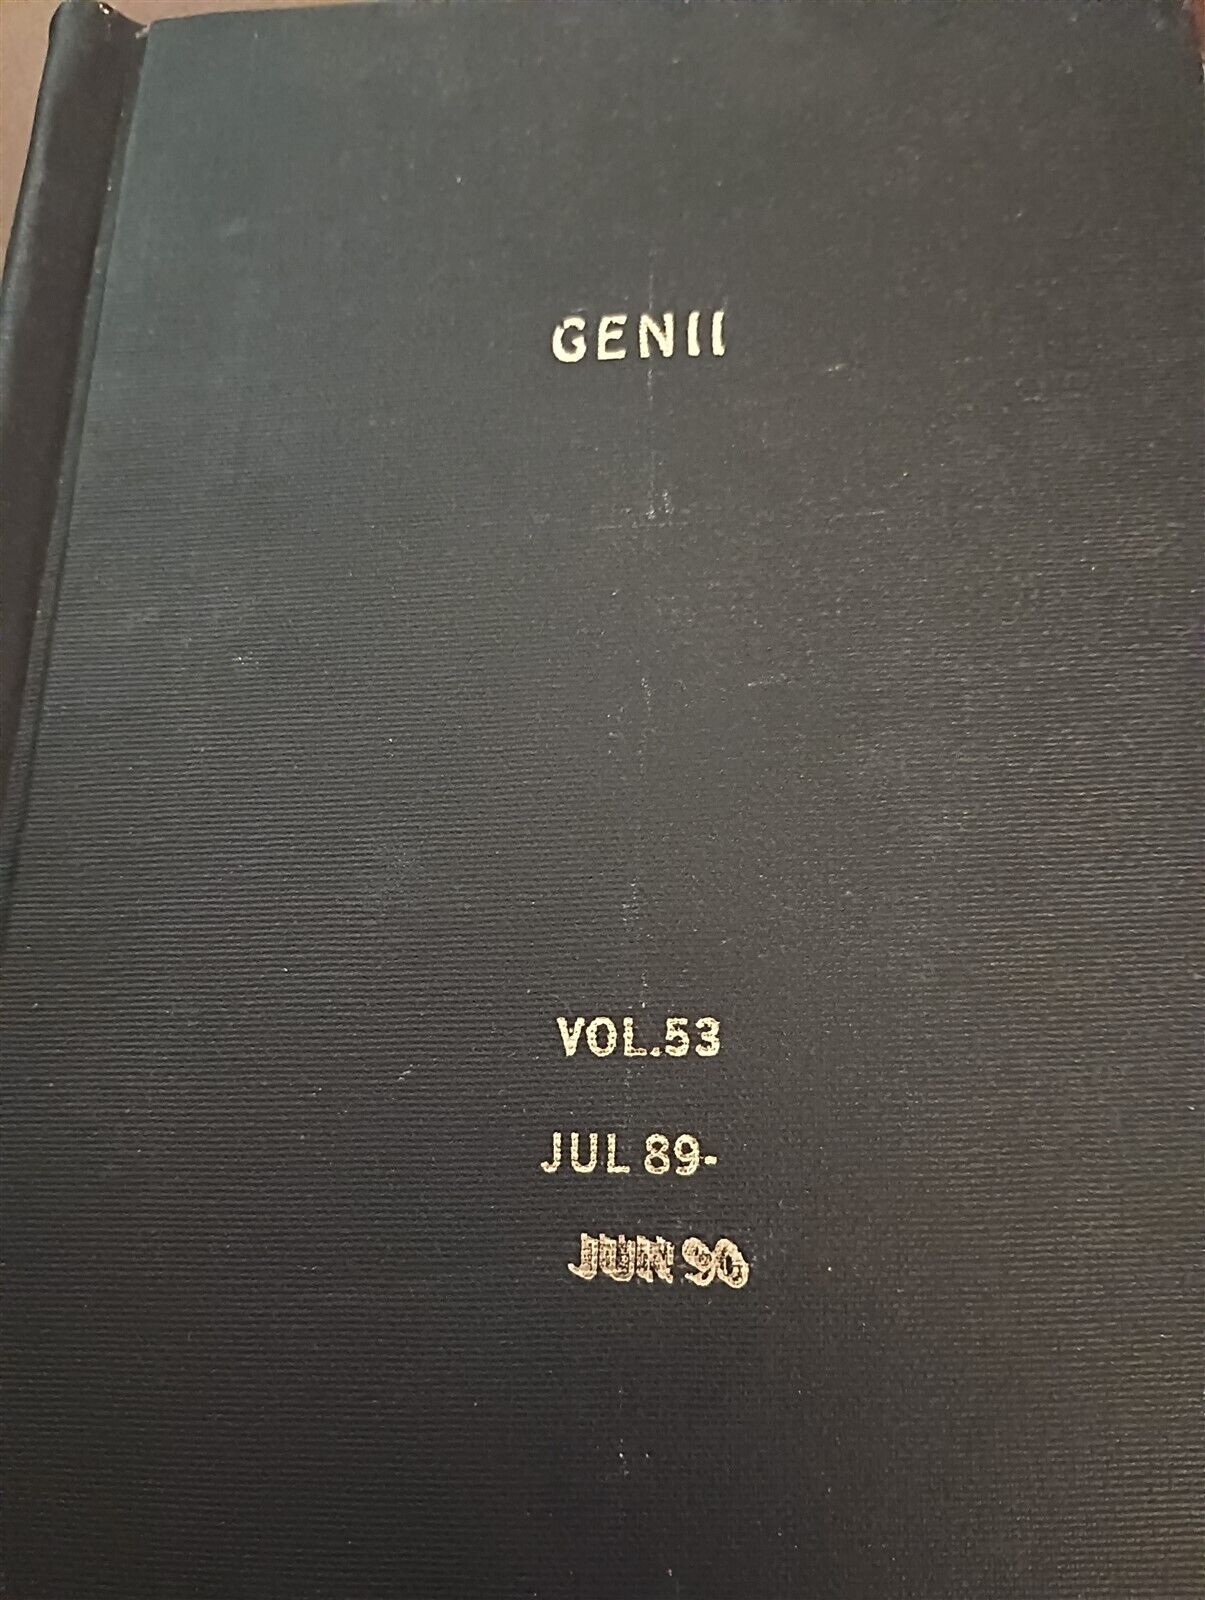 Genii Vintage Issues Vol. 53 July 1989-1990 Hardcover Bounded Issues Rare Find